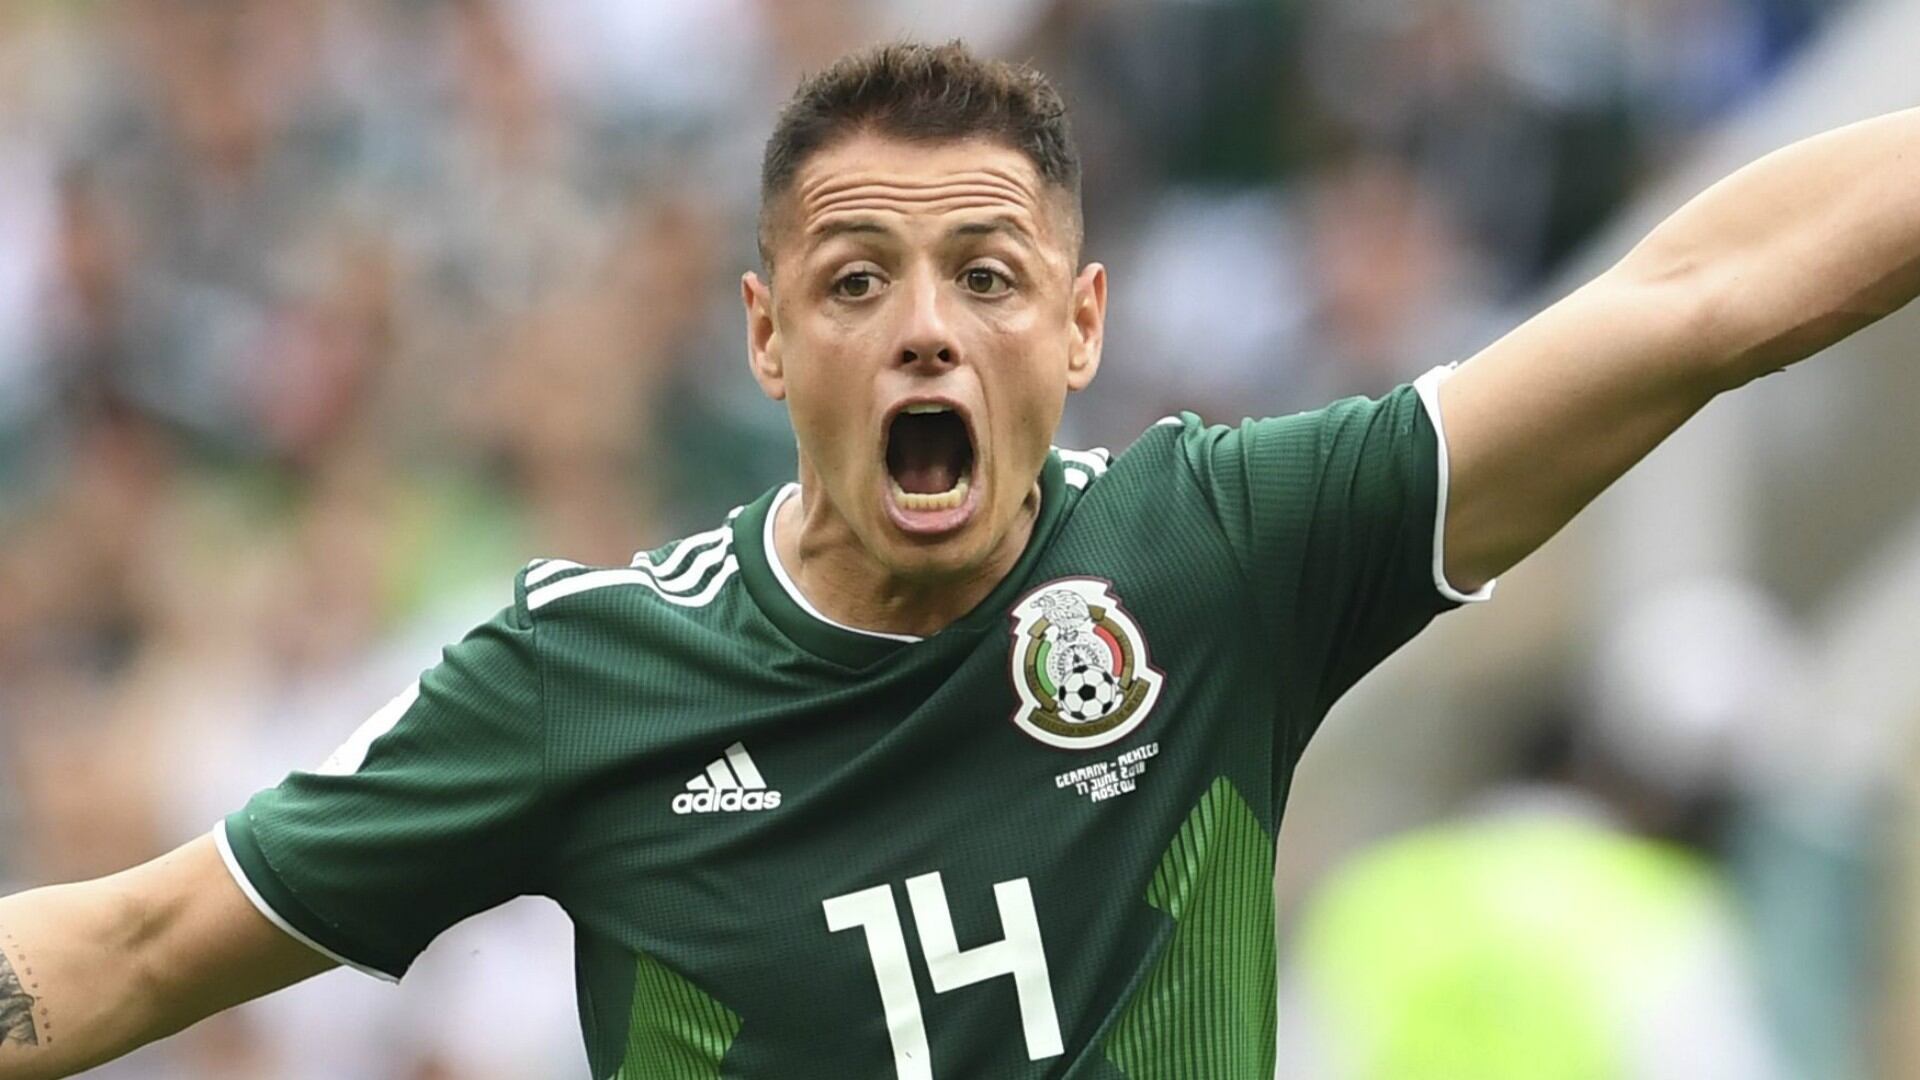 The record that Javier Chicharito Hernández will try and break in Catar 2022 with the Mexican National Team